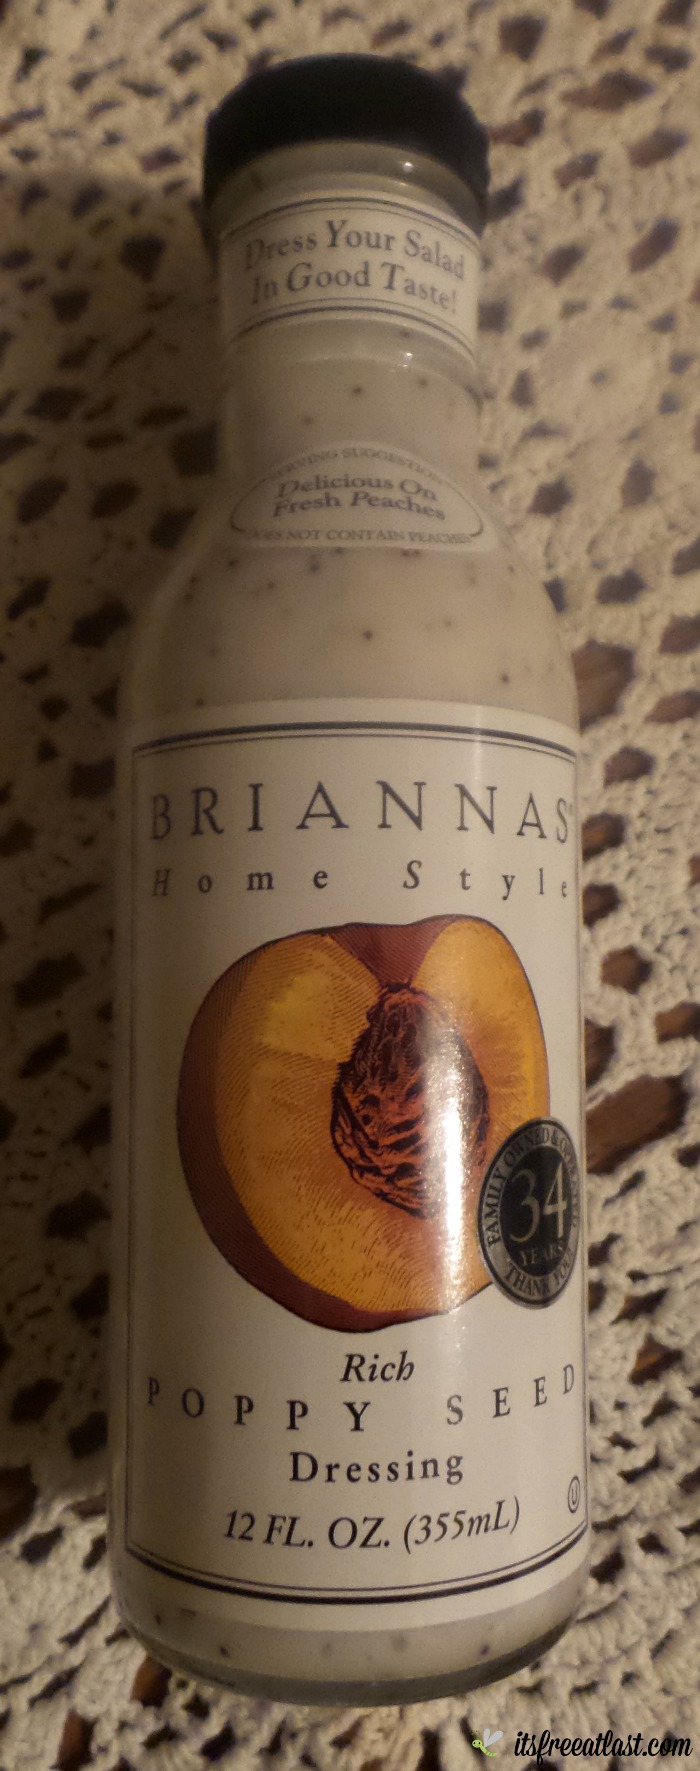 Briannas Home Style Poppy Seed Dressing